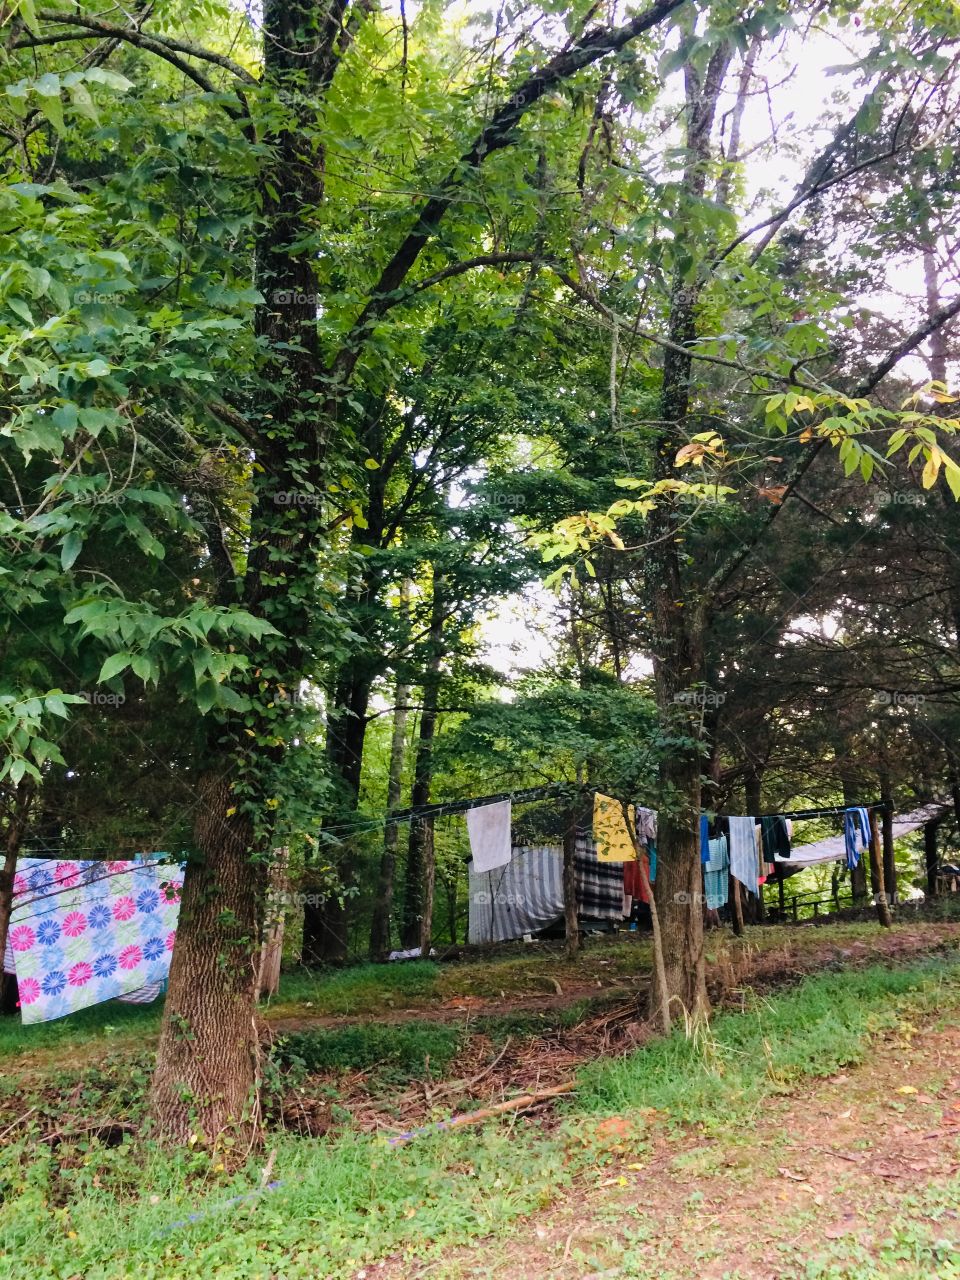 Clothing drying on a clothesline in the Tennessee mountains